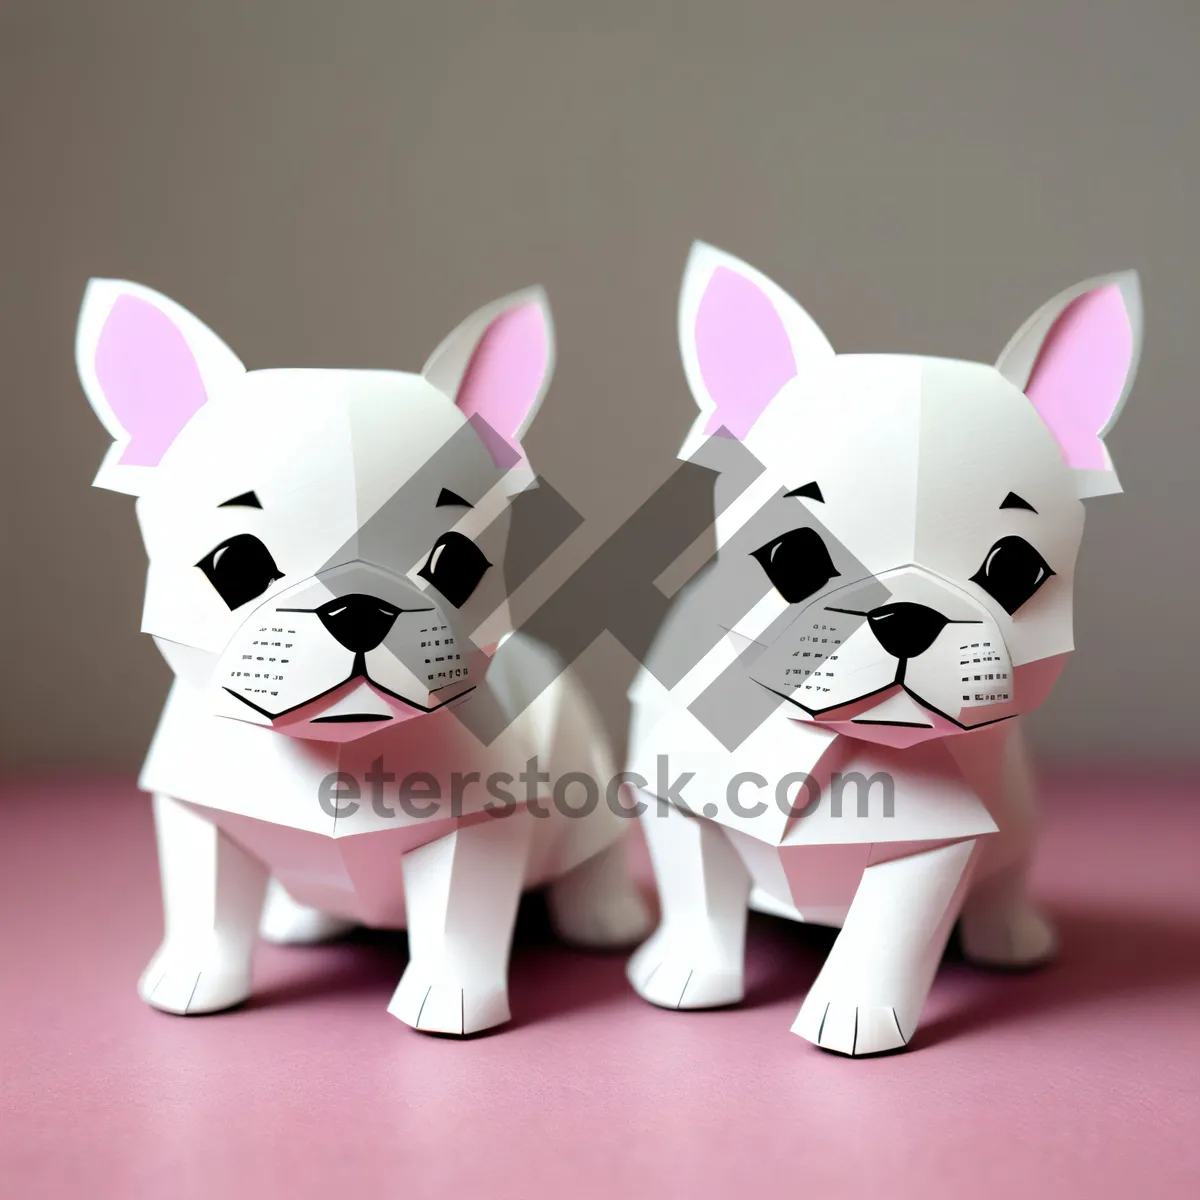 Picture of Playful Piggy Savings Bank - adorable cartoon piglet container.